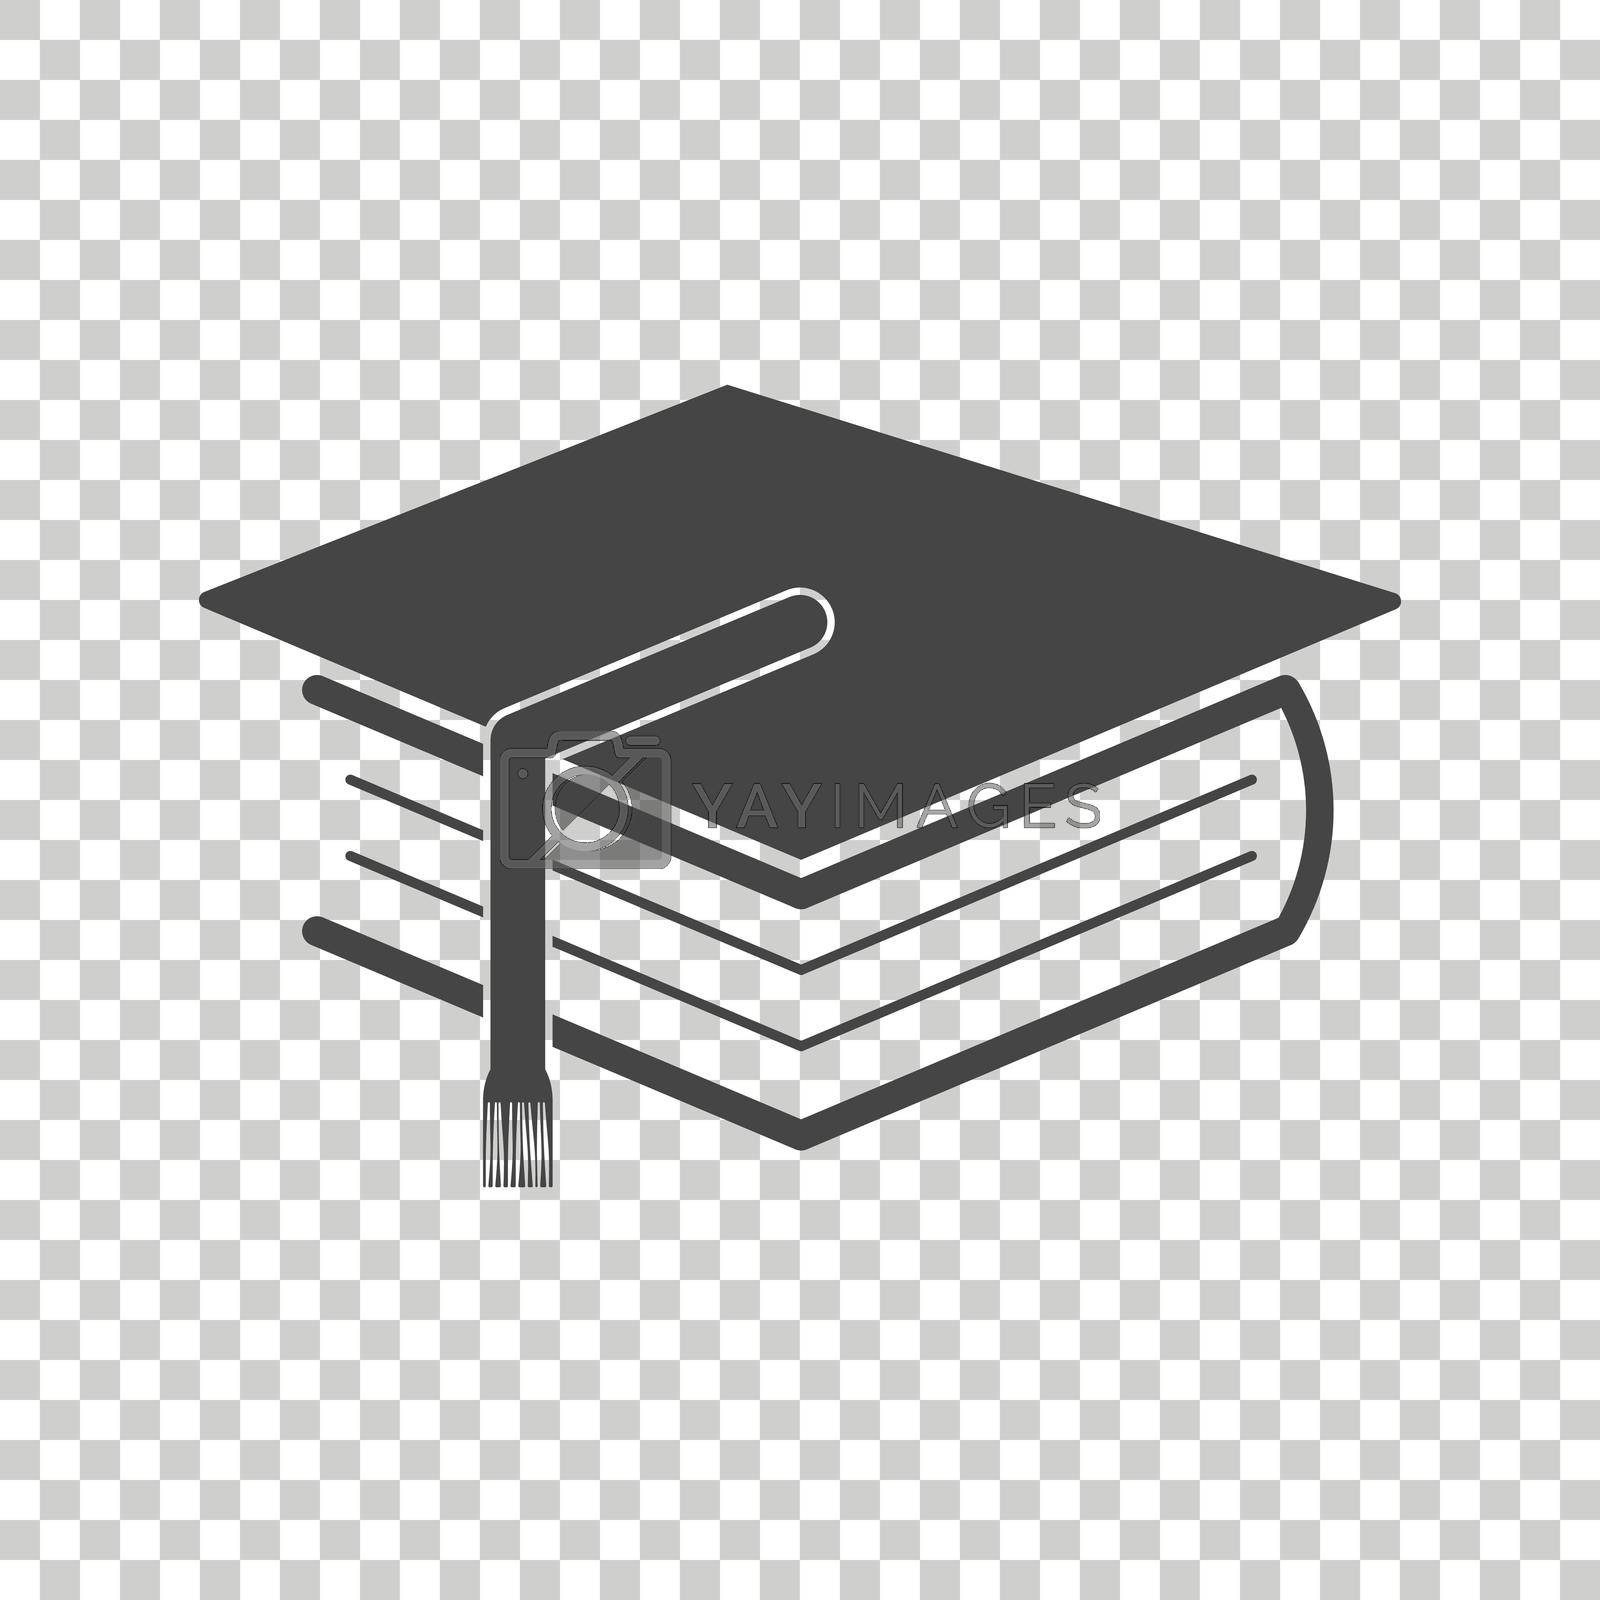 Education and book. Flat icon vector